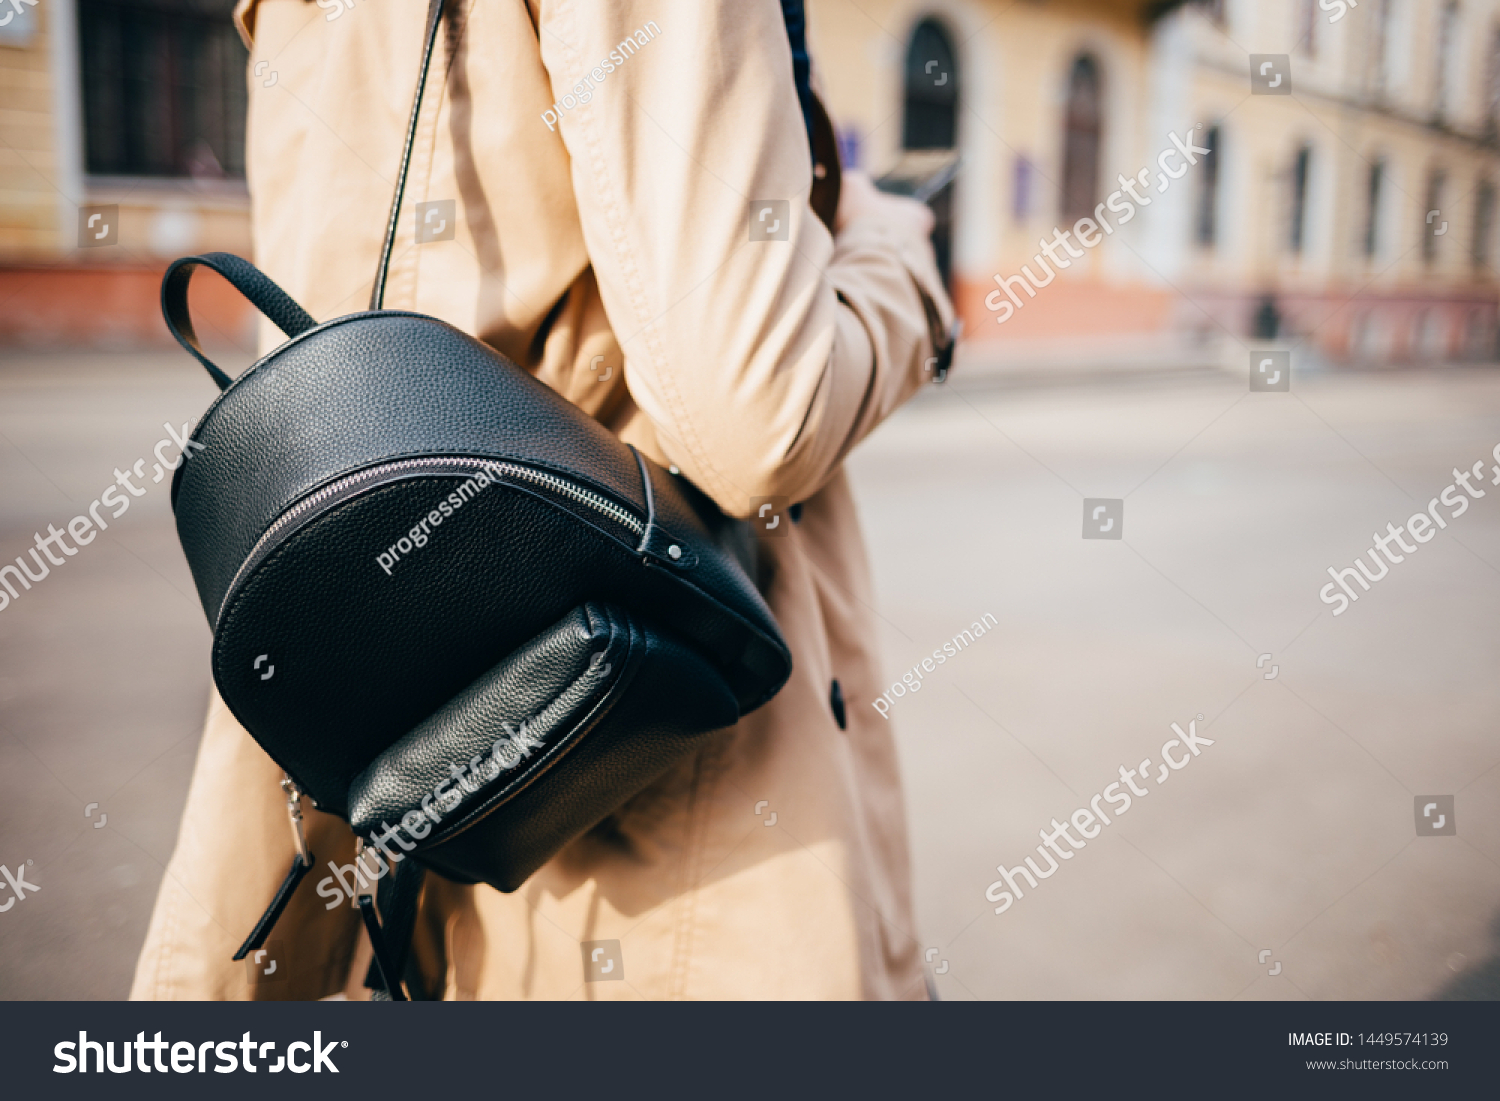 Close-up of elegant women's backpack. Rear view of young woman dressed in beige coat and with black bag walking down street in city. #1449574139